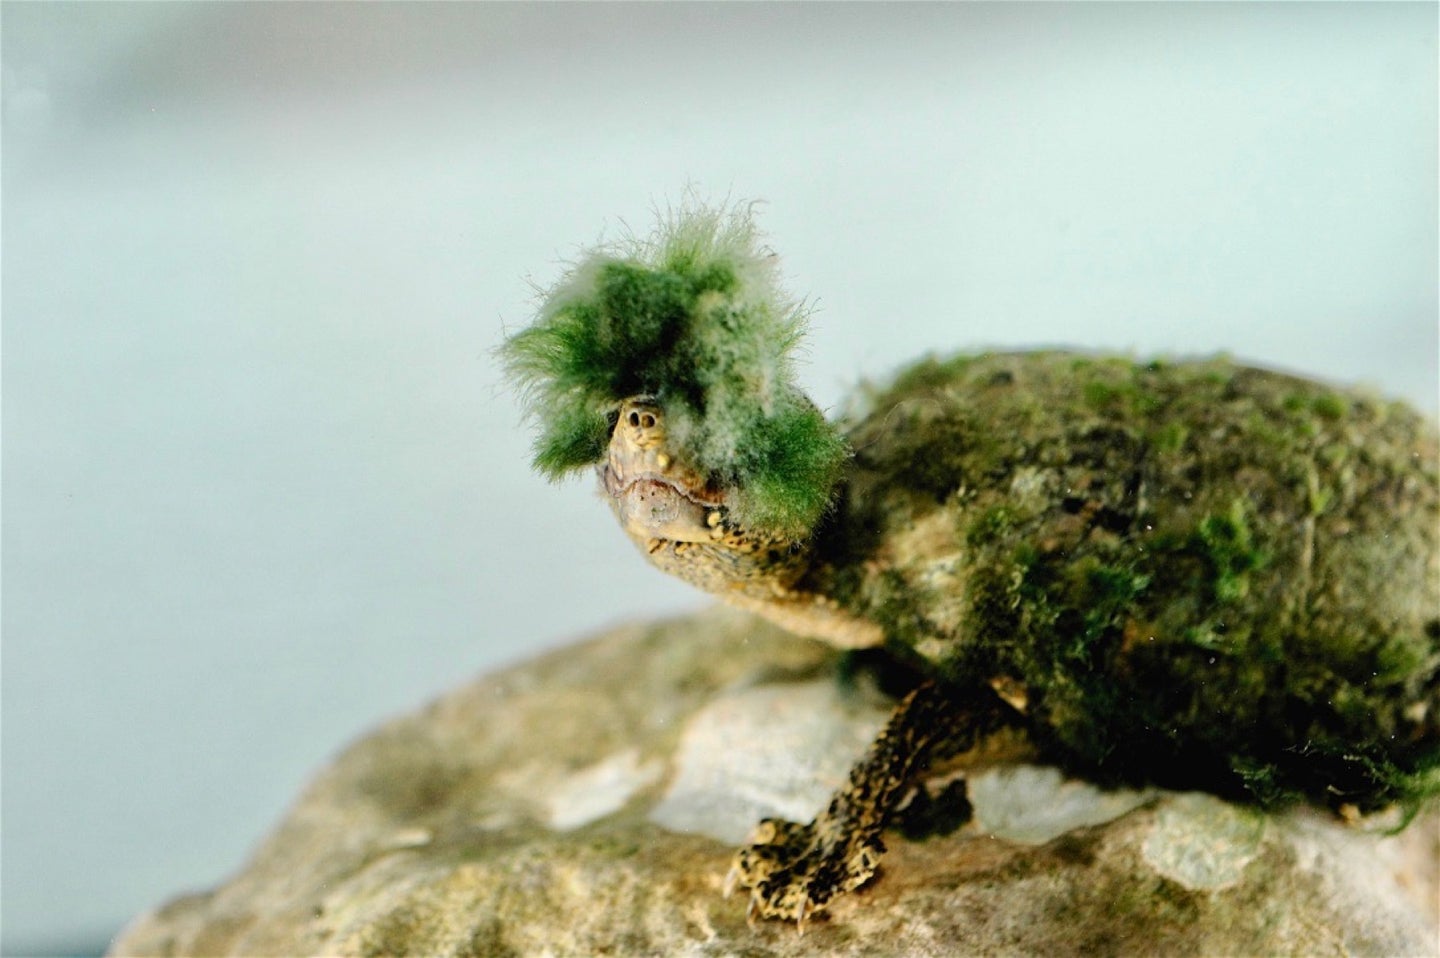 a turtle with a bit of moss on its face